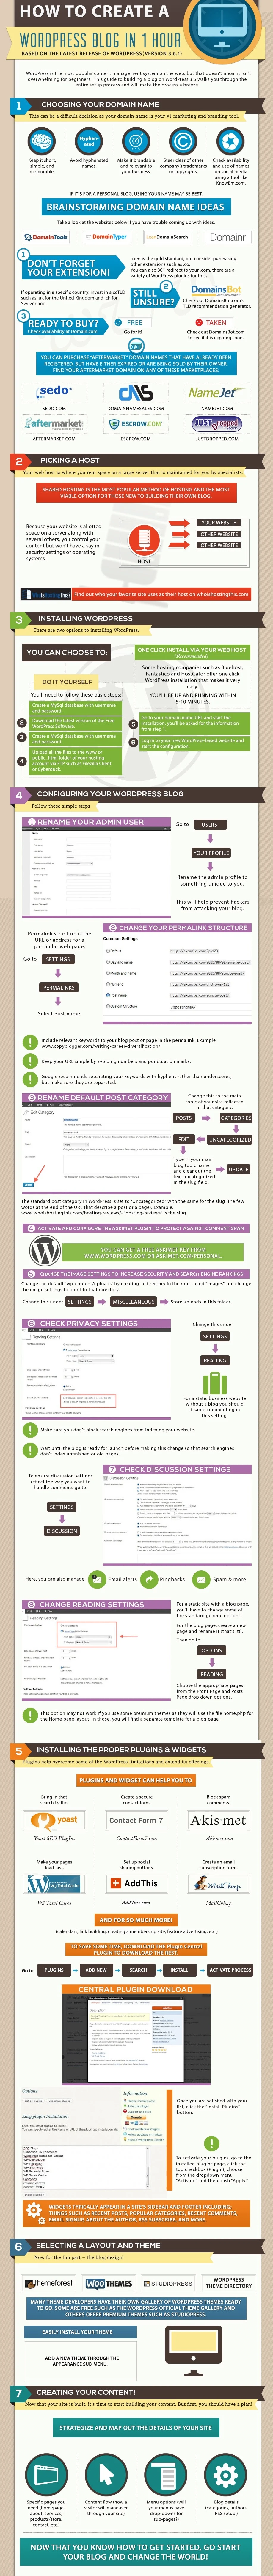 How to Install WordPress - #infographic